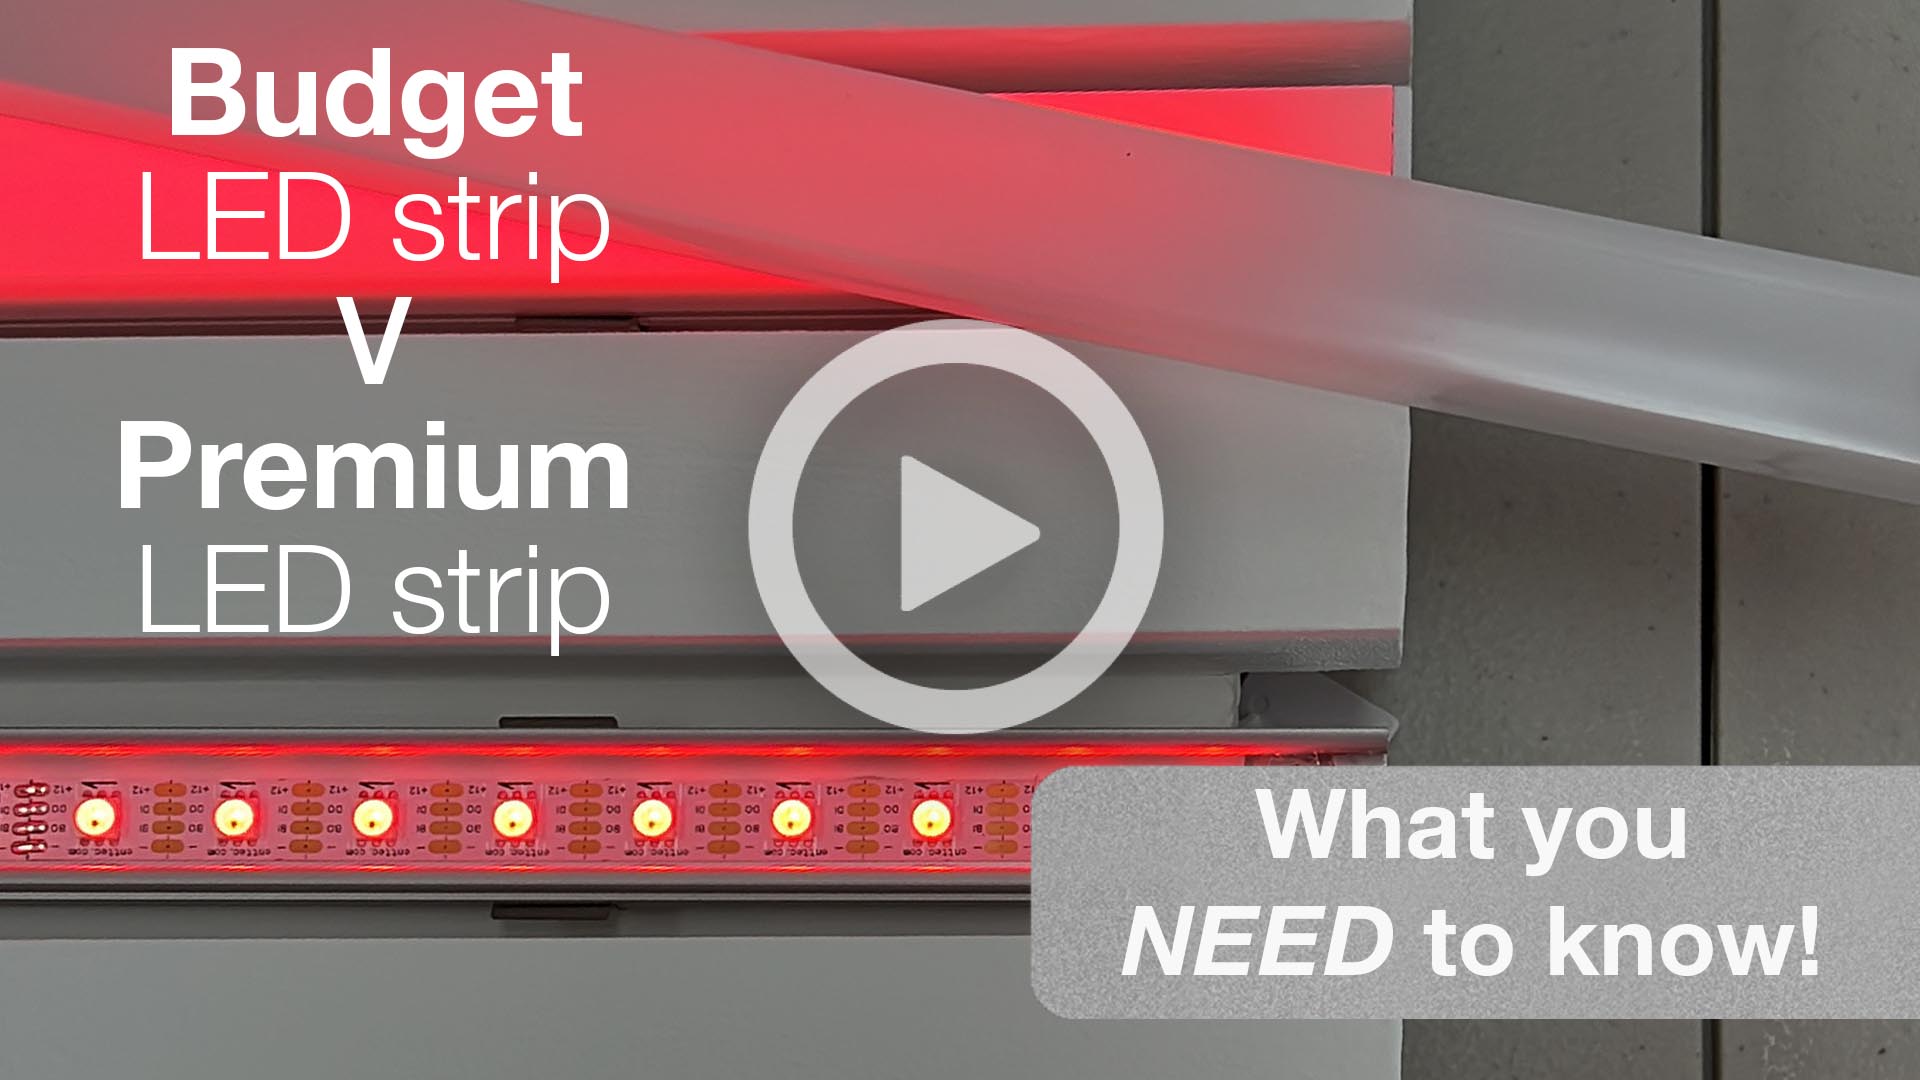 Brilliant quality LED strip light made to match your lighting